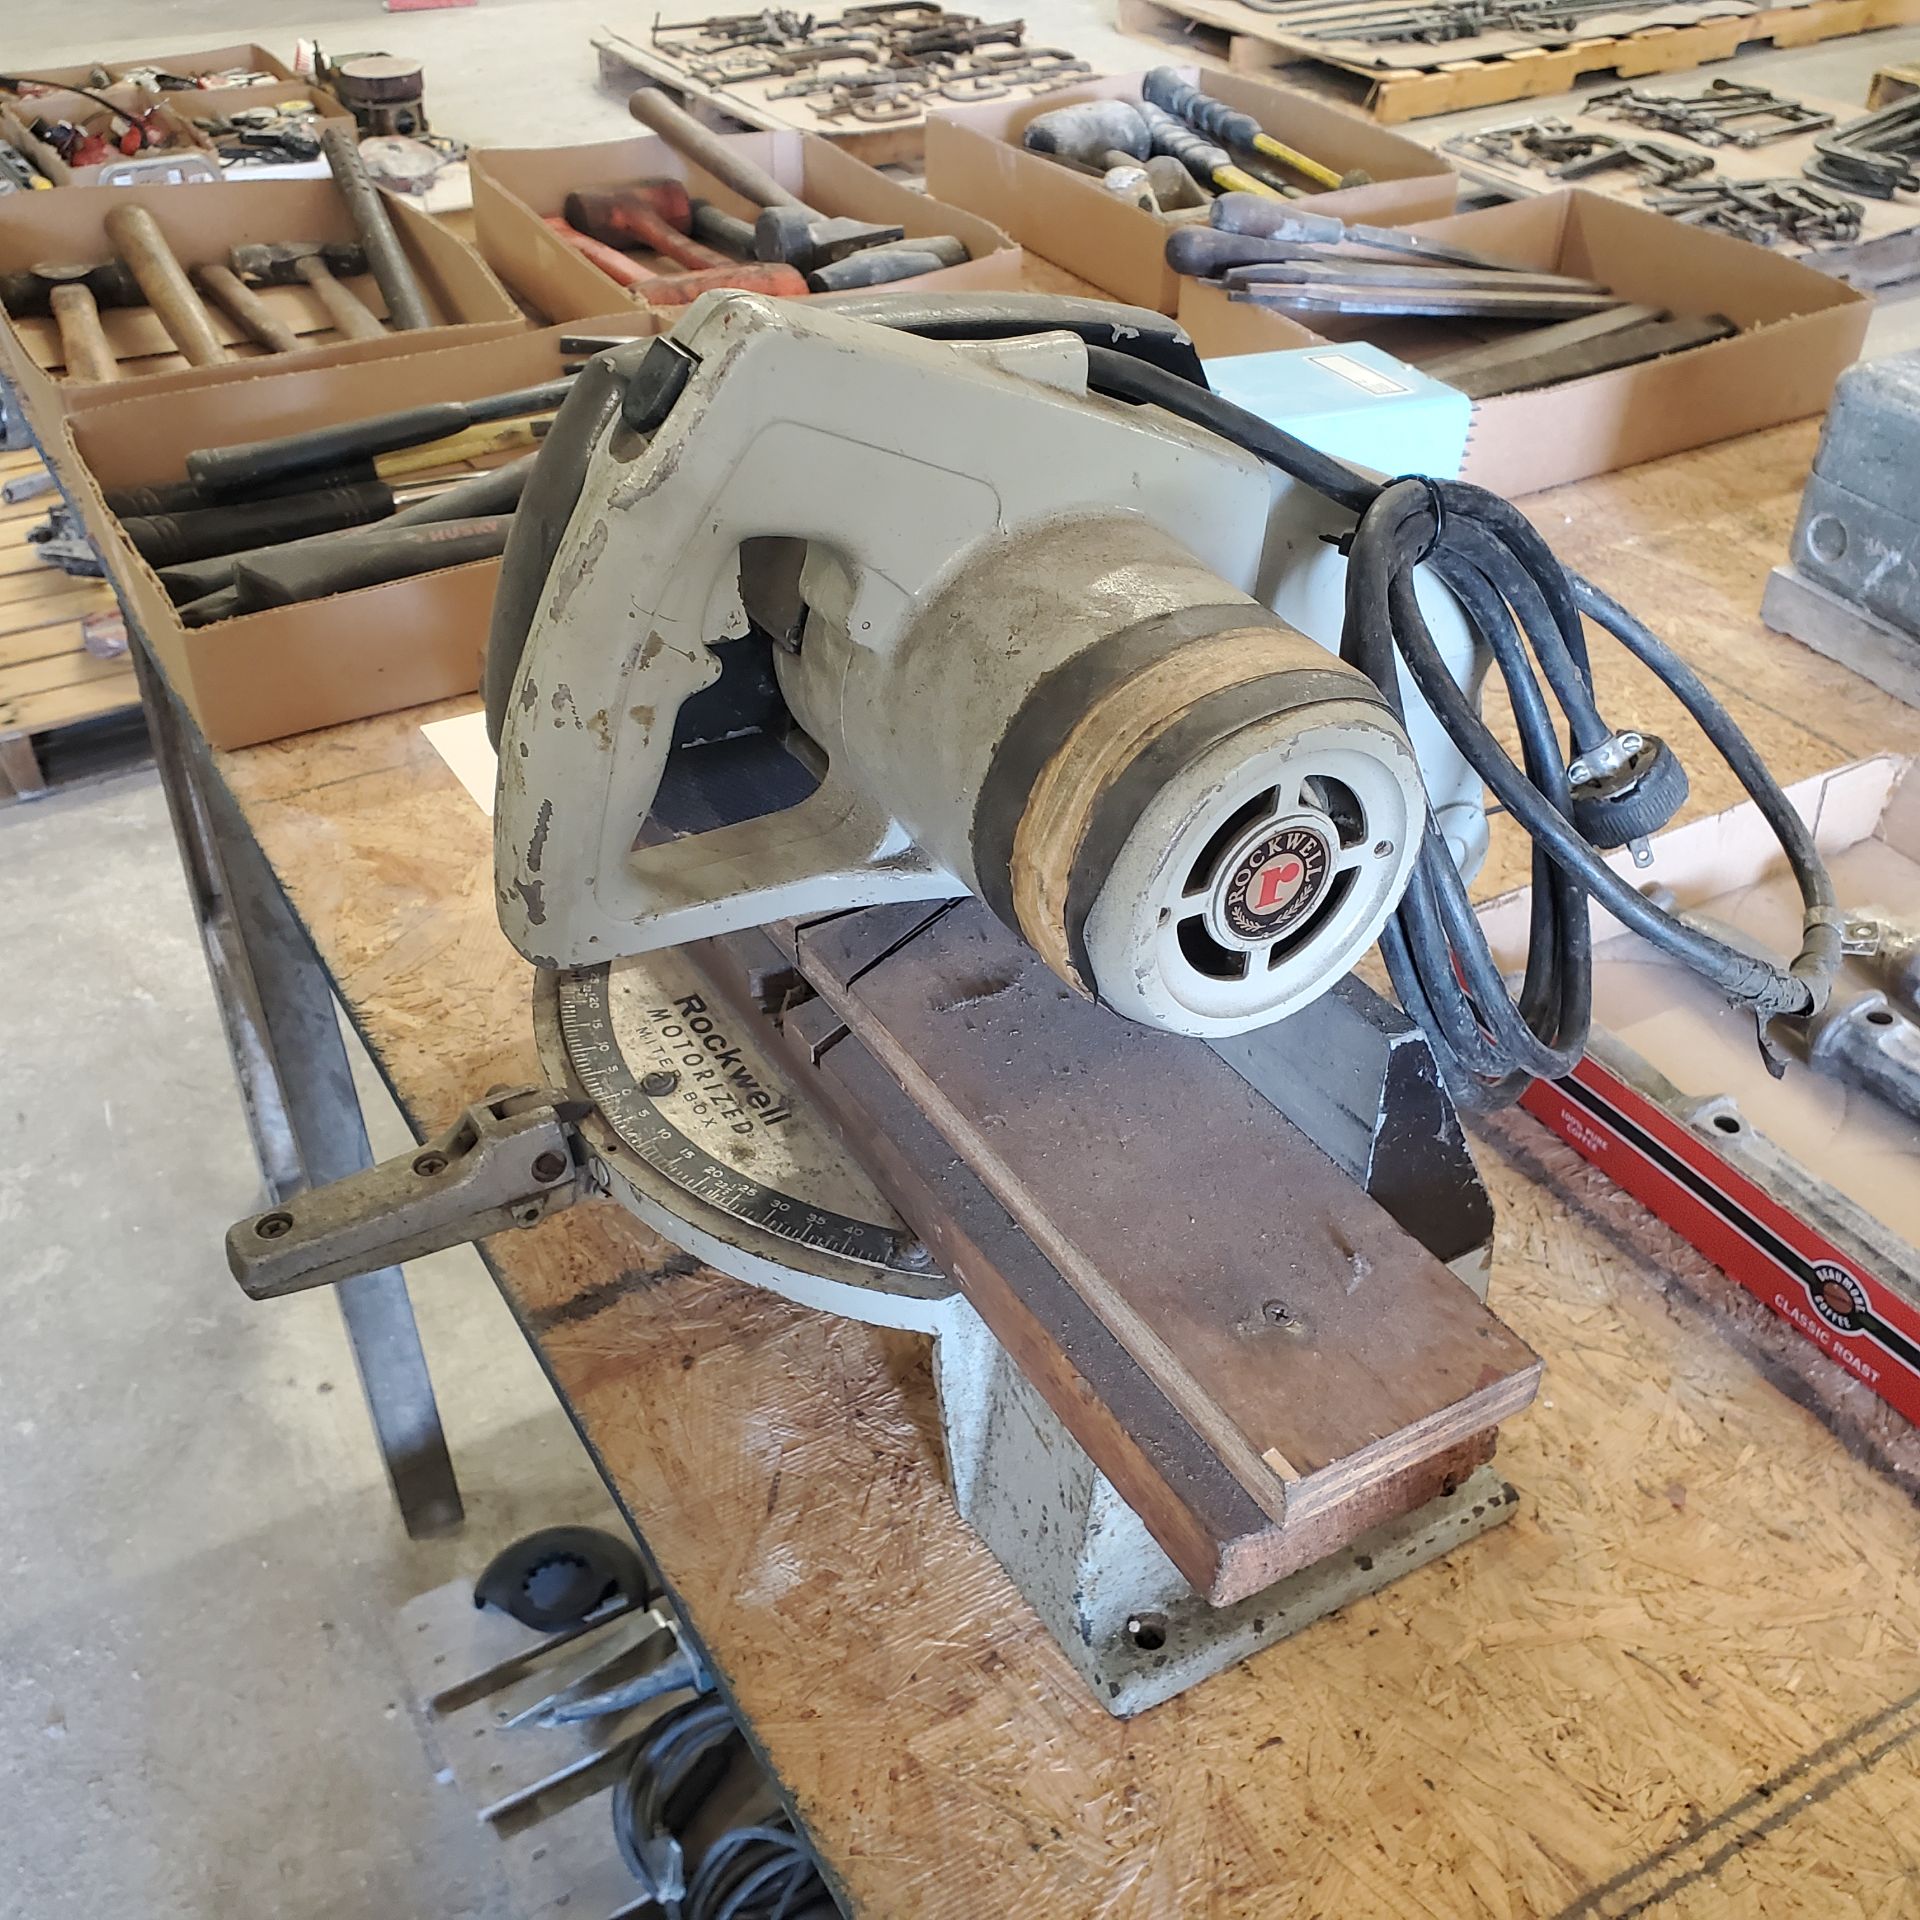 Rockwell #34-010 Mitre Saw, S/N 101780 - Image 2 of 2